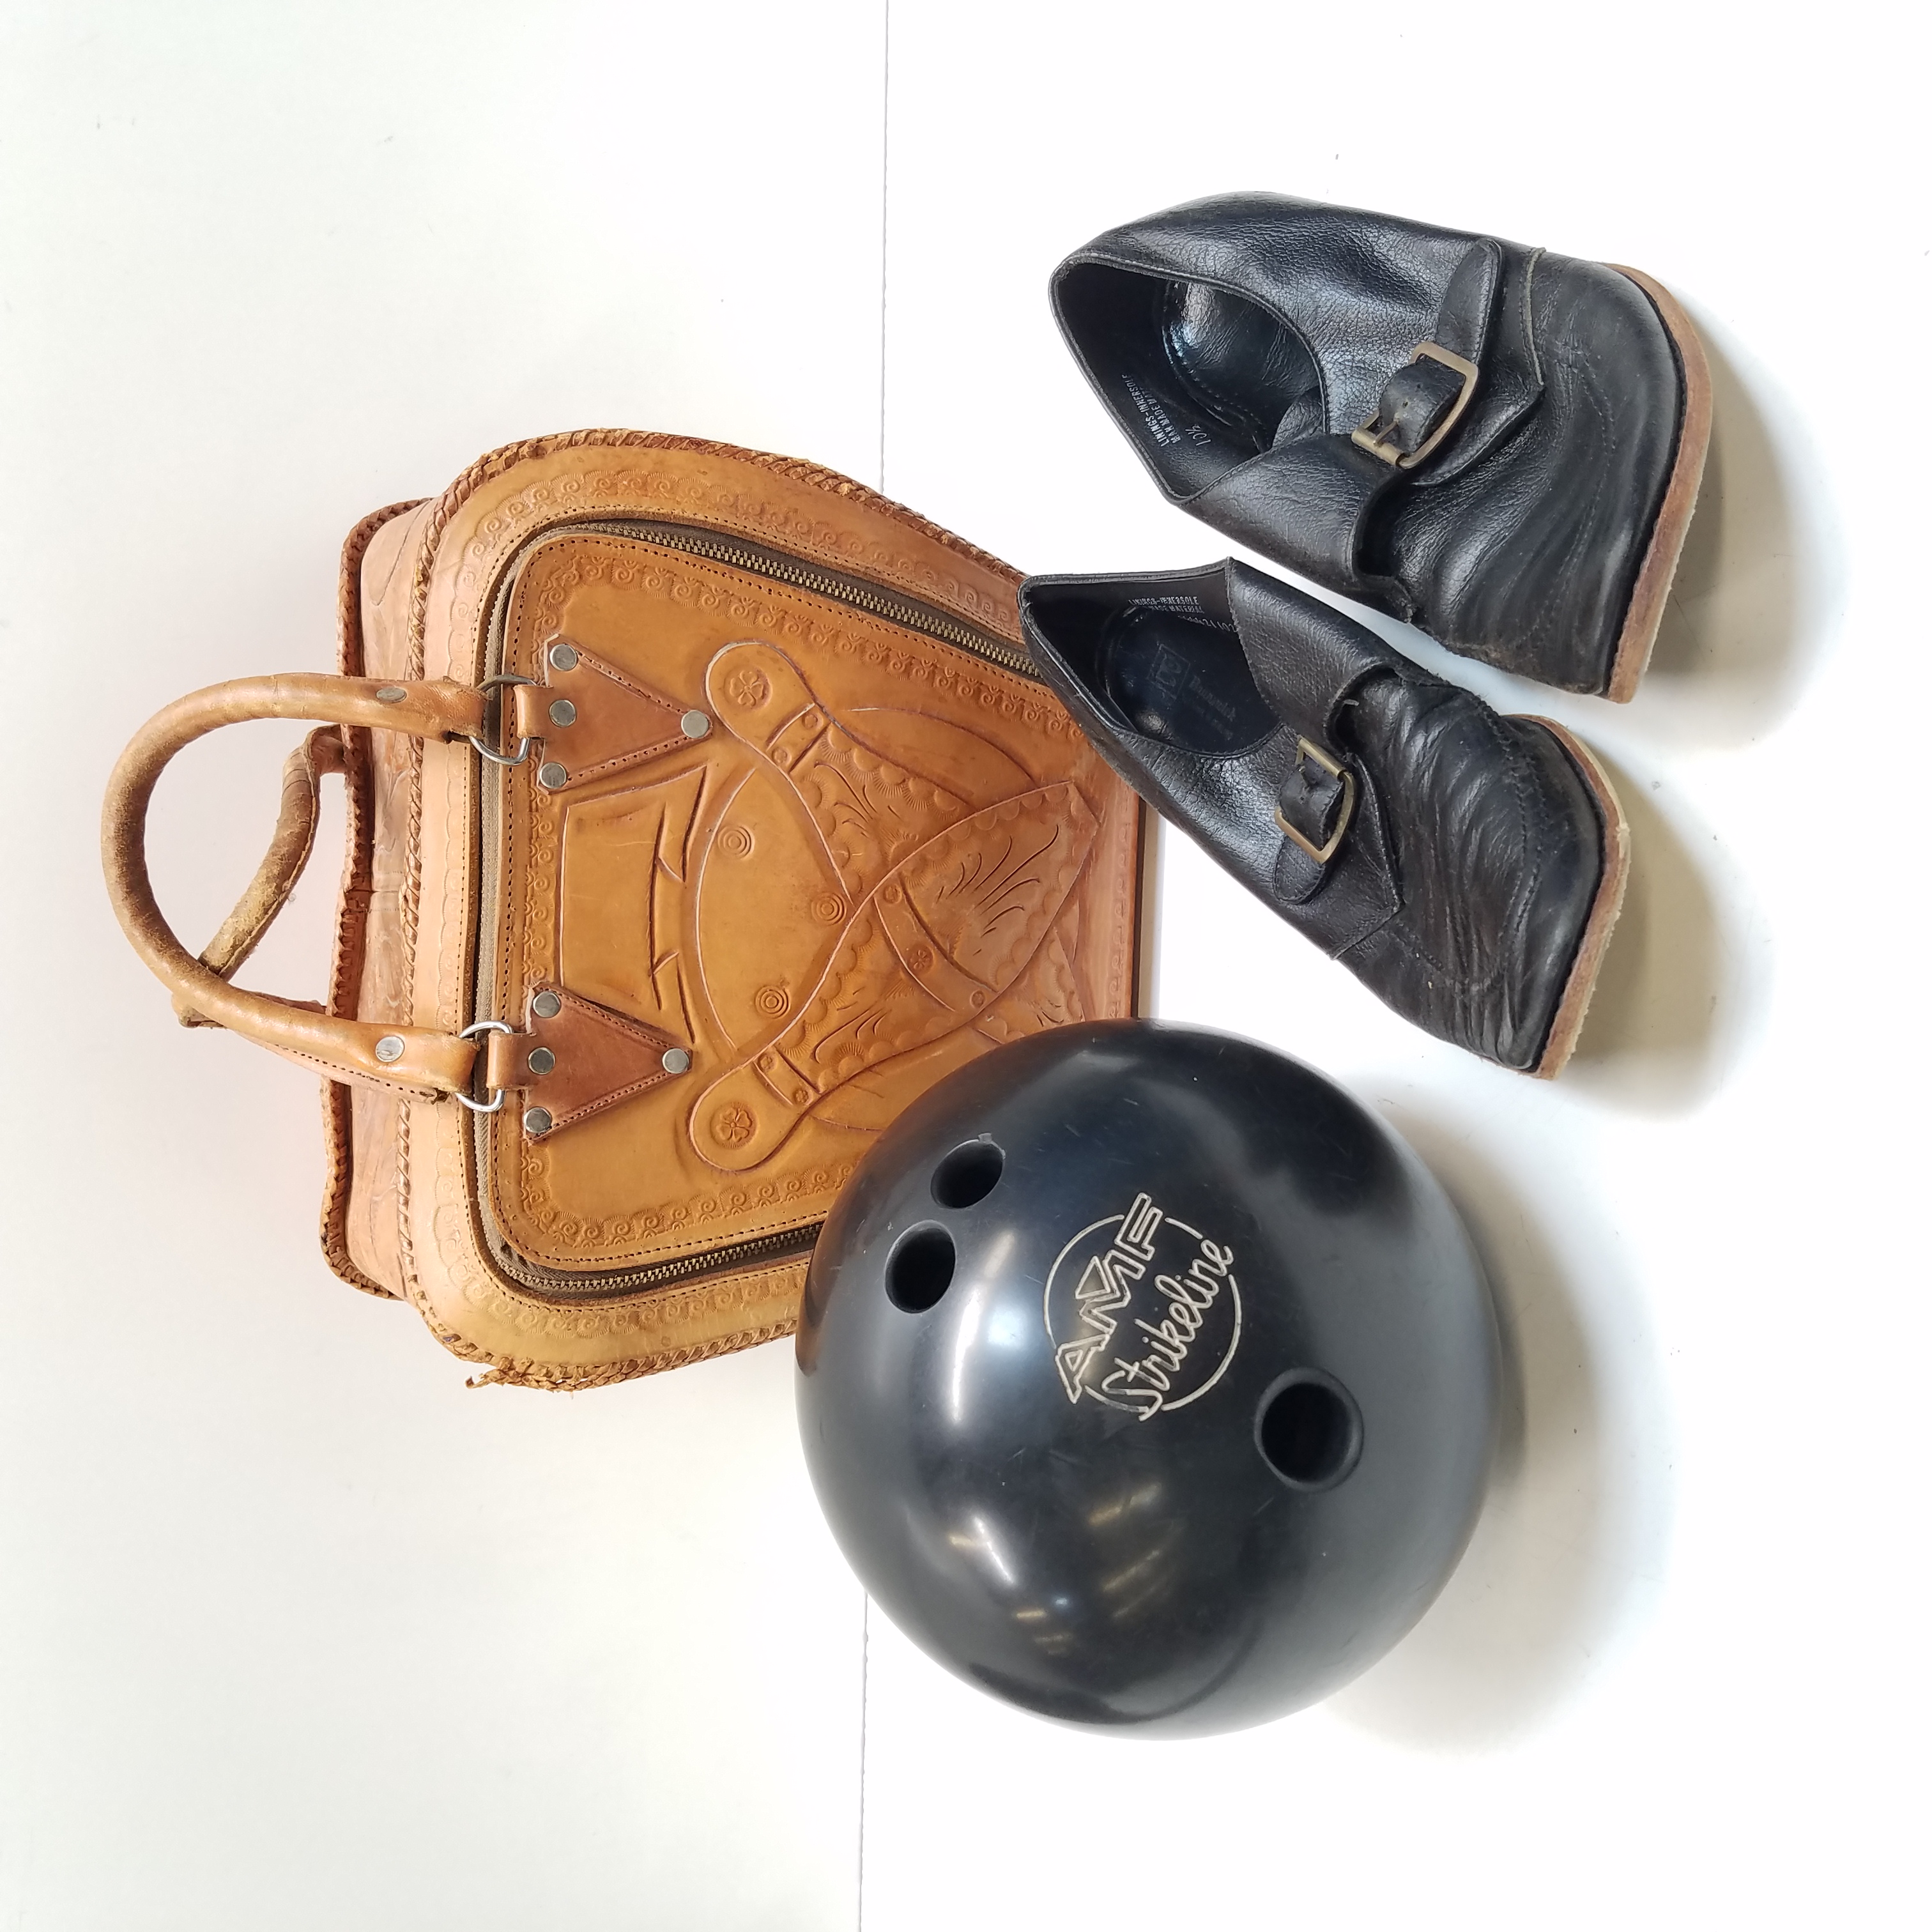 Lot # 33- Vintage Leather Brunswick Bowling Ball Bag, Vintage Bowling Shoes  and Balls - Quality Estate Auctions